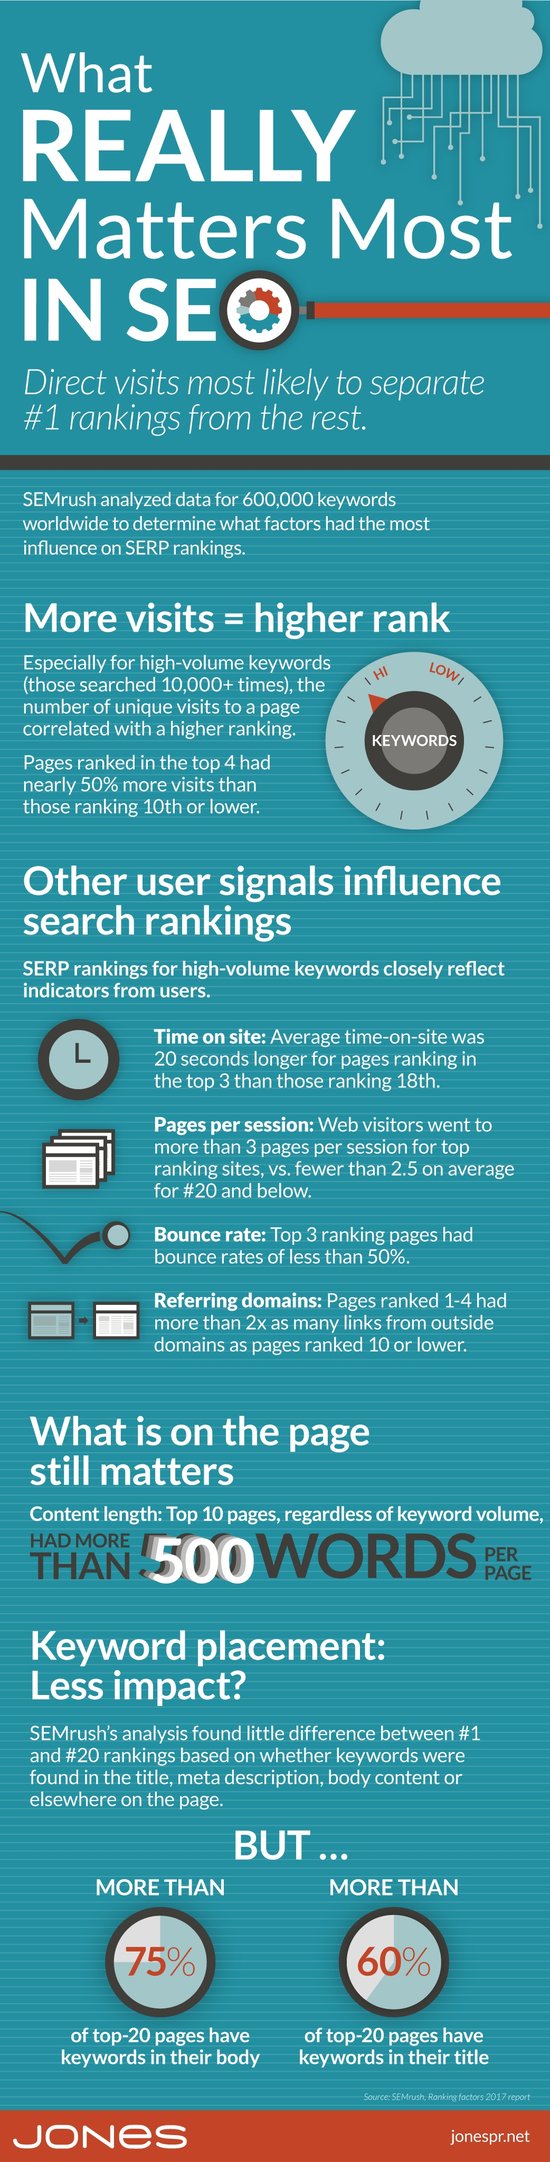 What Matters Most in Search Rankings? (SEO infographic)